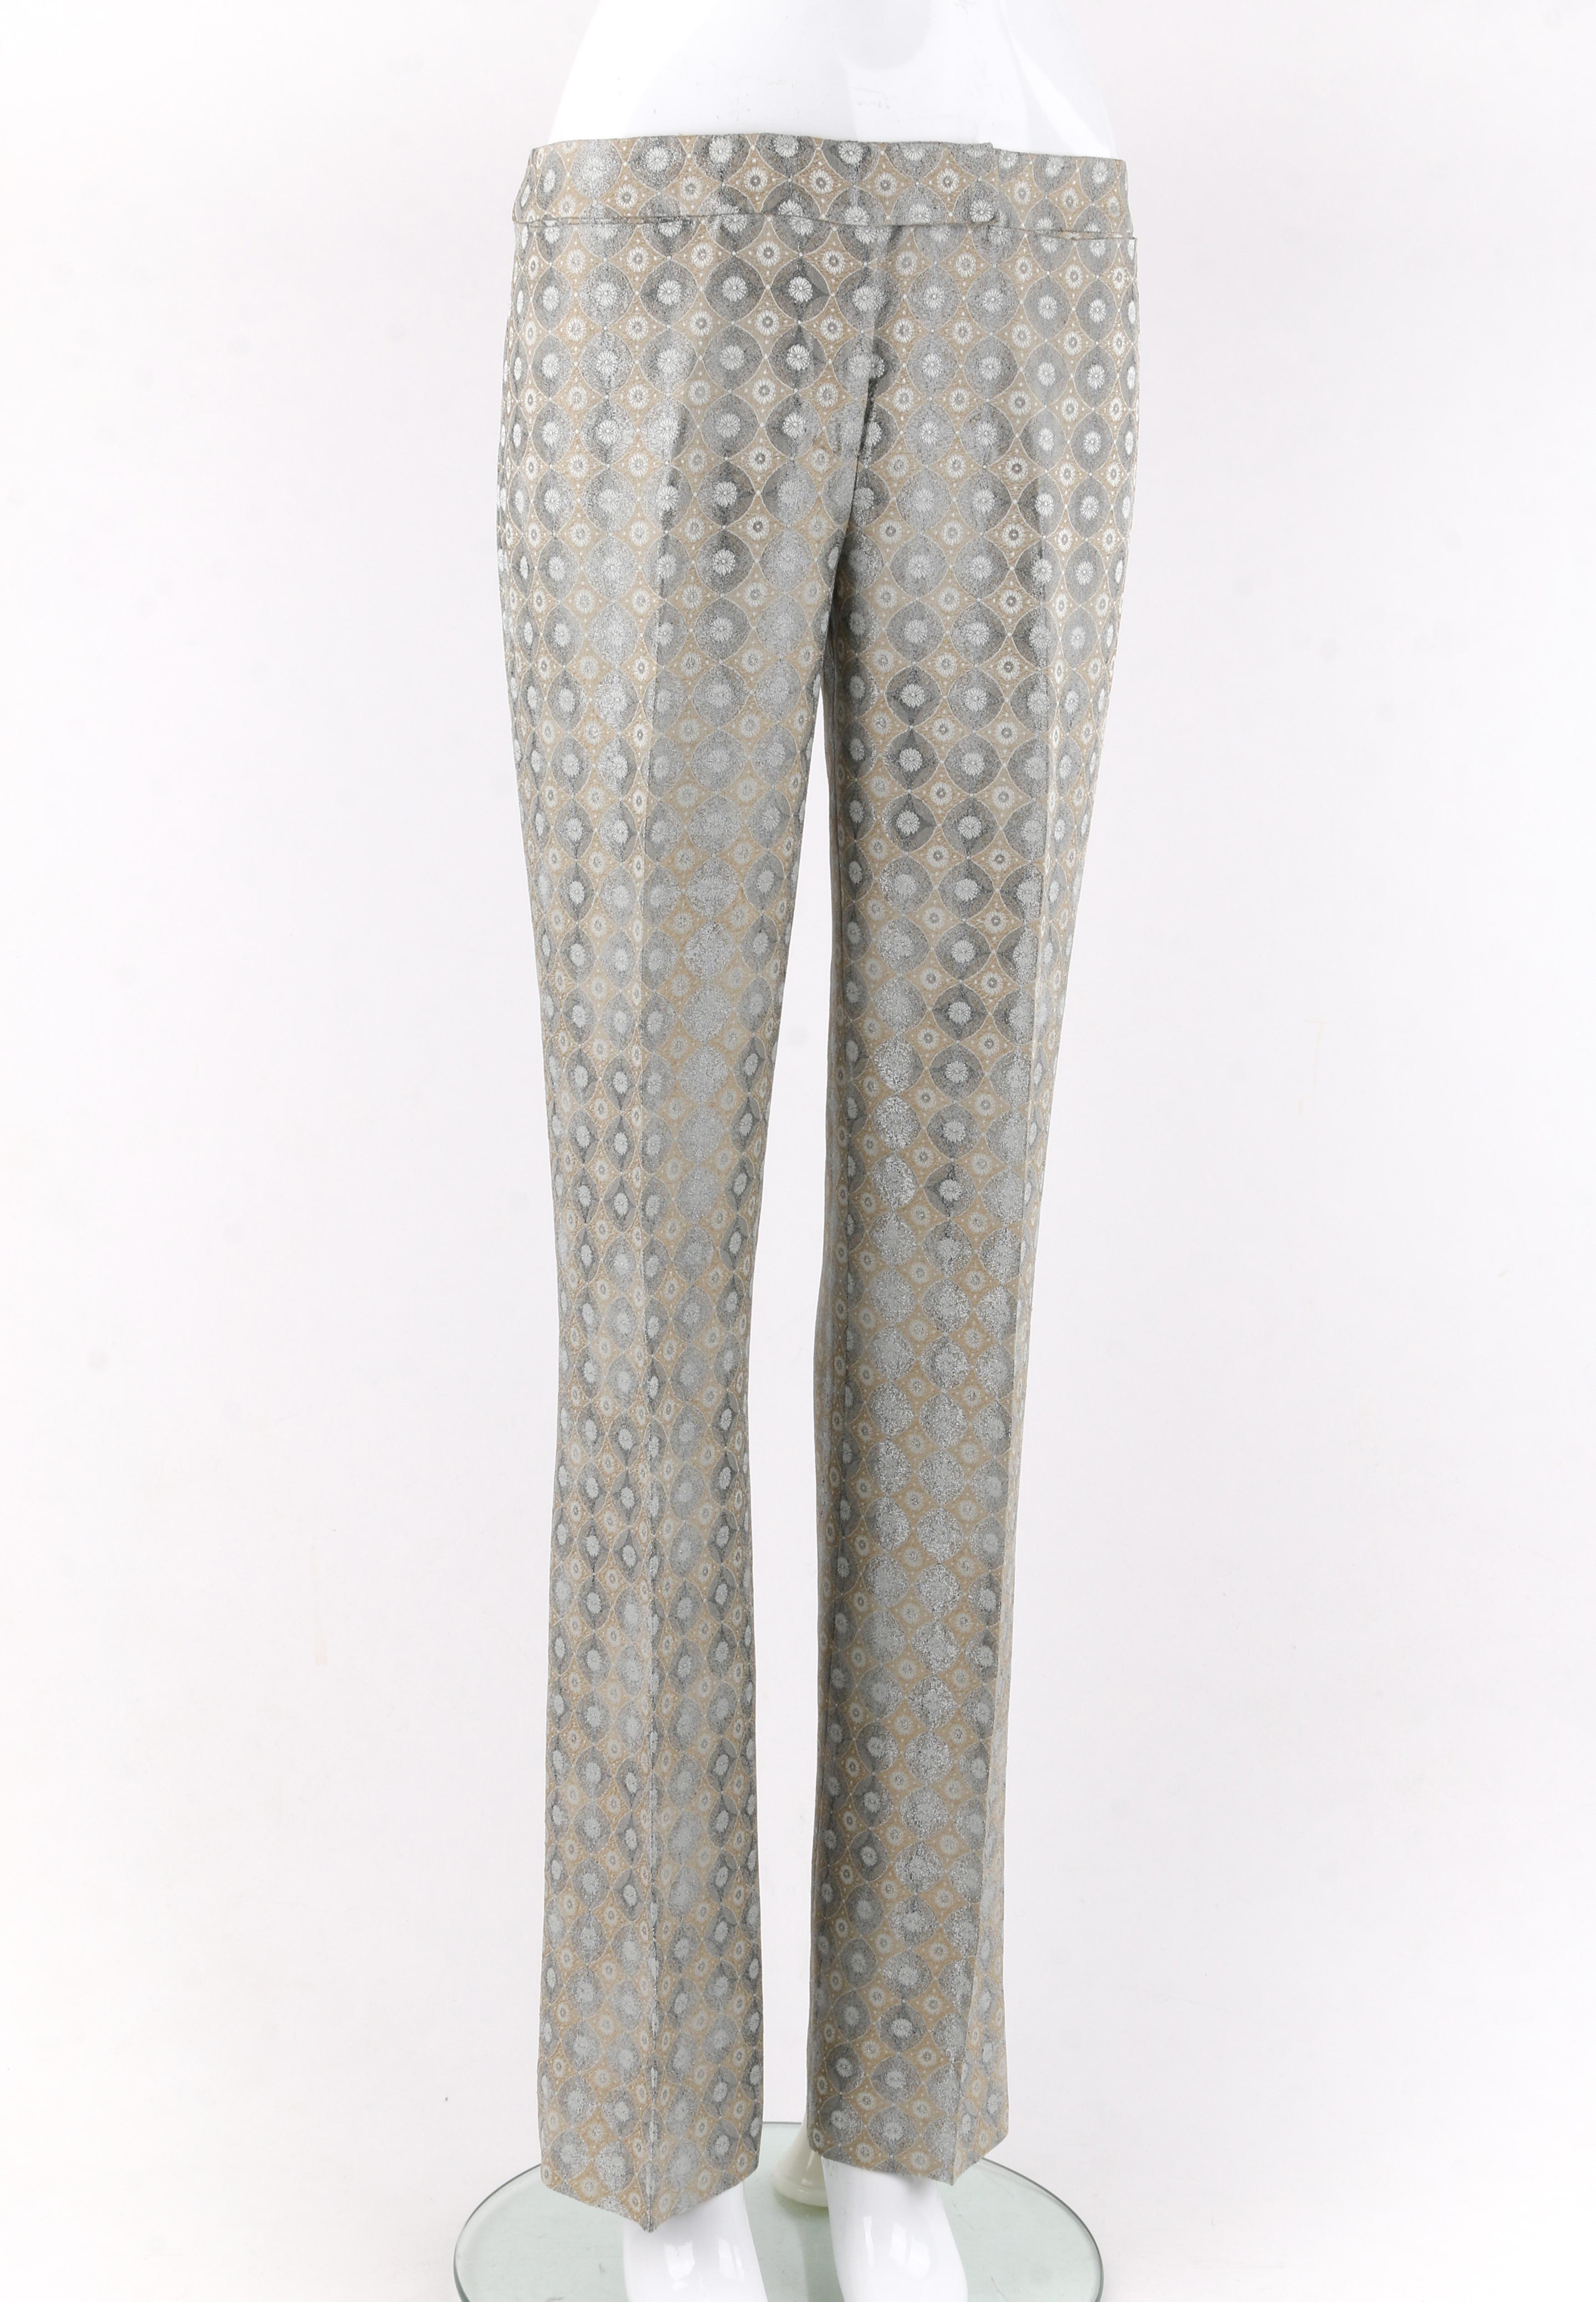 ALEXANDER McQUEEN A/W 2003 “Scanners” Metallic Geometric Boot-cut Pants Trousers
 
Brand / Manufacturer: Alexander McQueen 
Collection: Autumn / Winter 2003 “Scanners”
Style: Trousers, slacks, pants
Color(s): Shades of beige, tan, off-white, silver